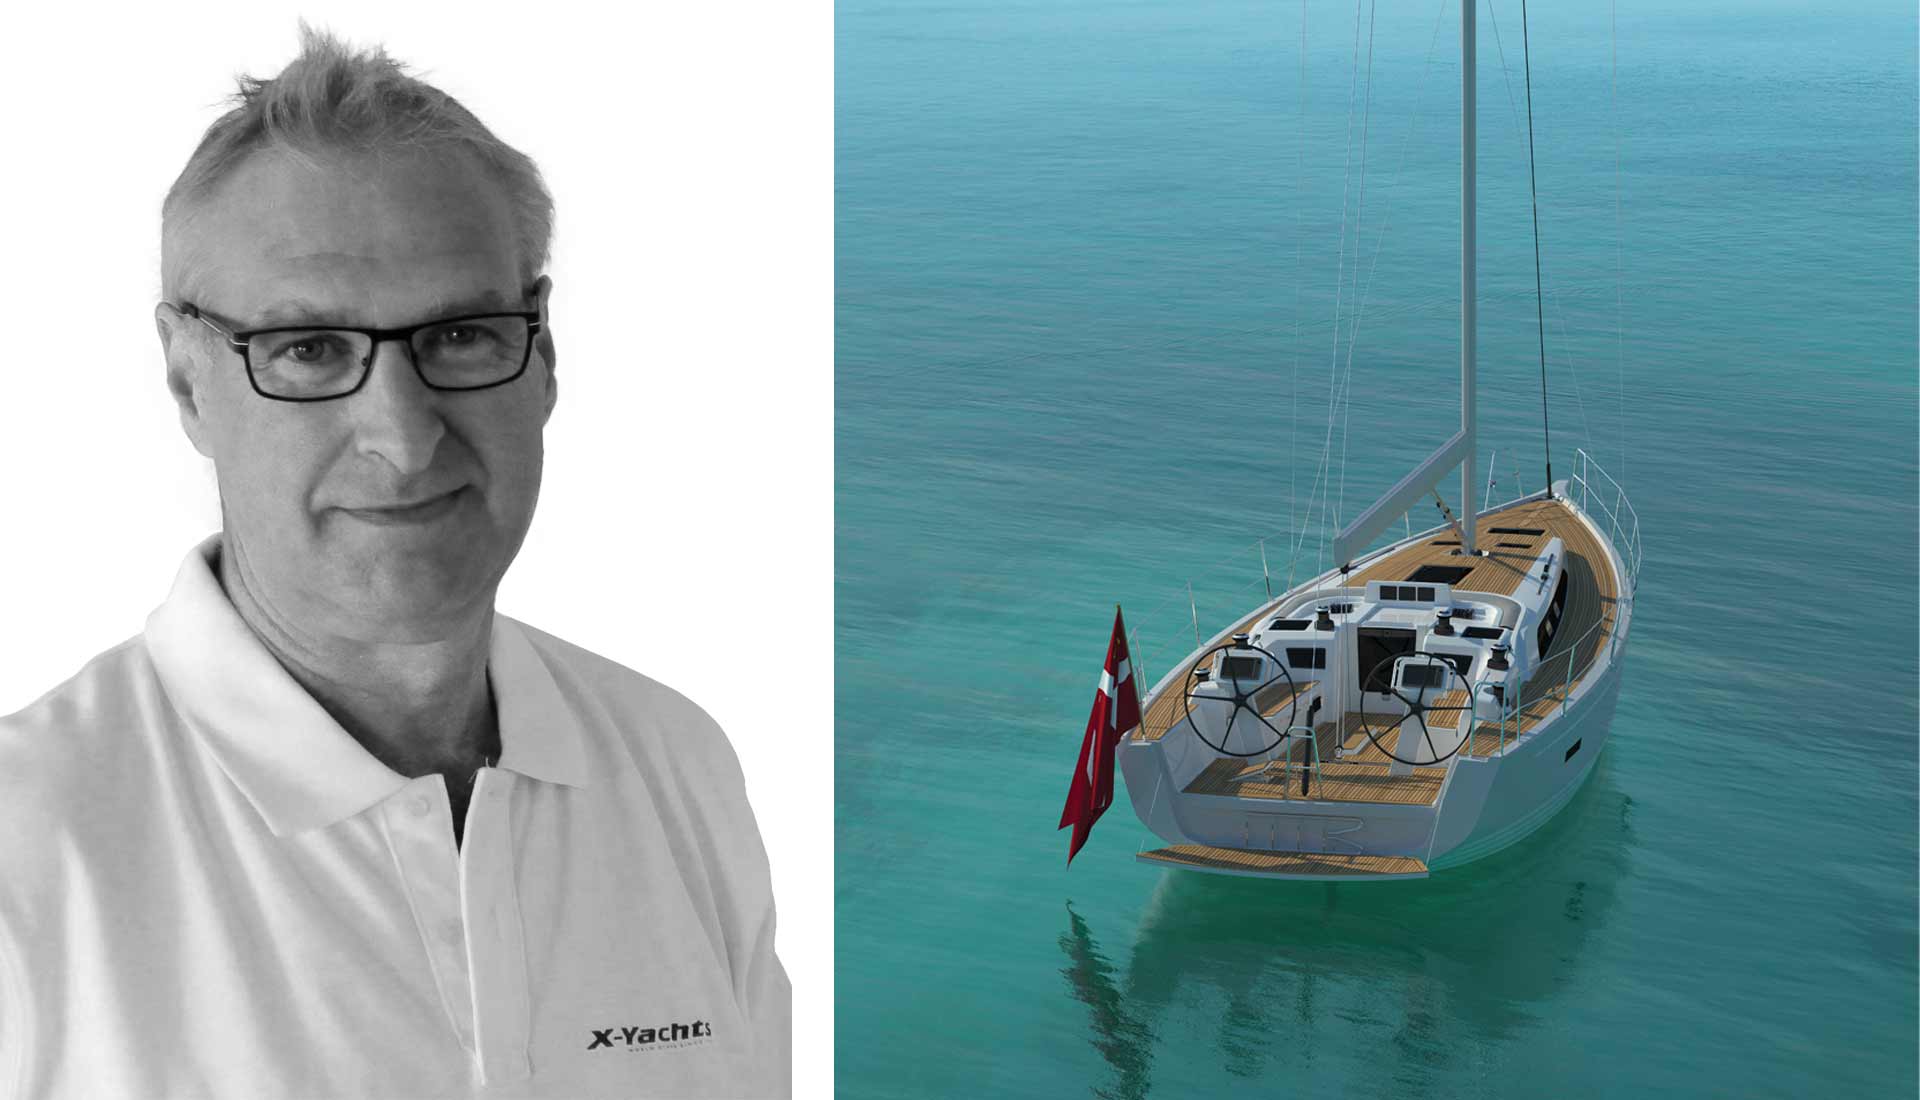 Niels Jeppesen: Founder of X-Yachts and enthusiastic about building yachts.